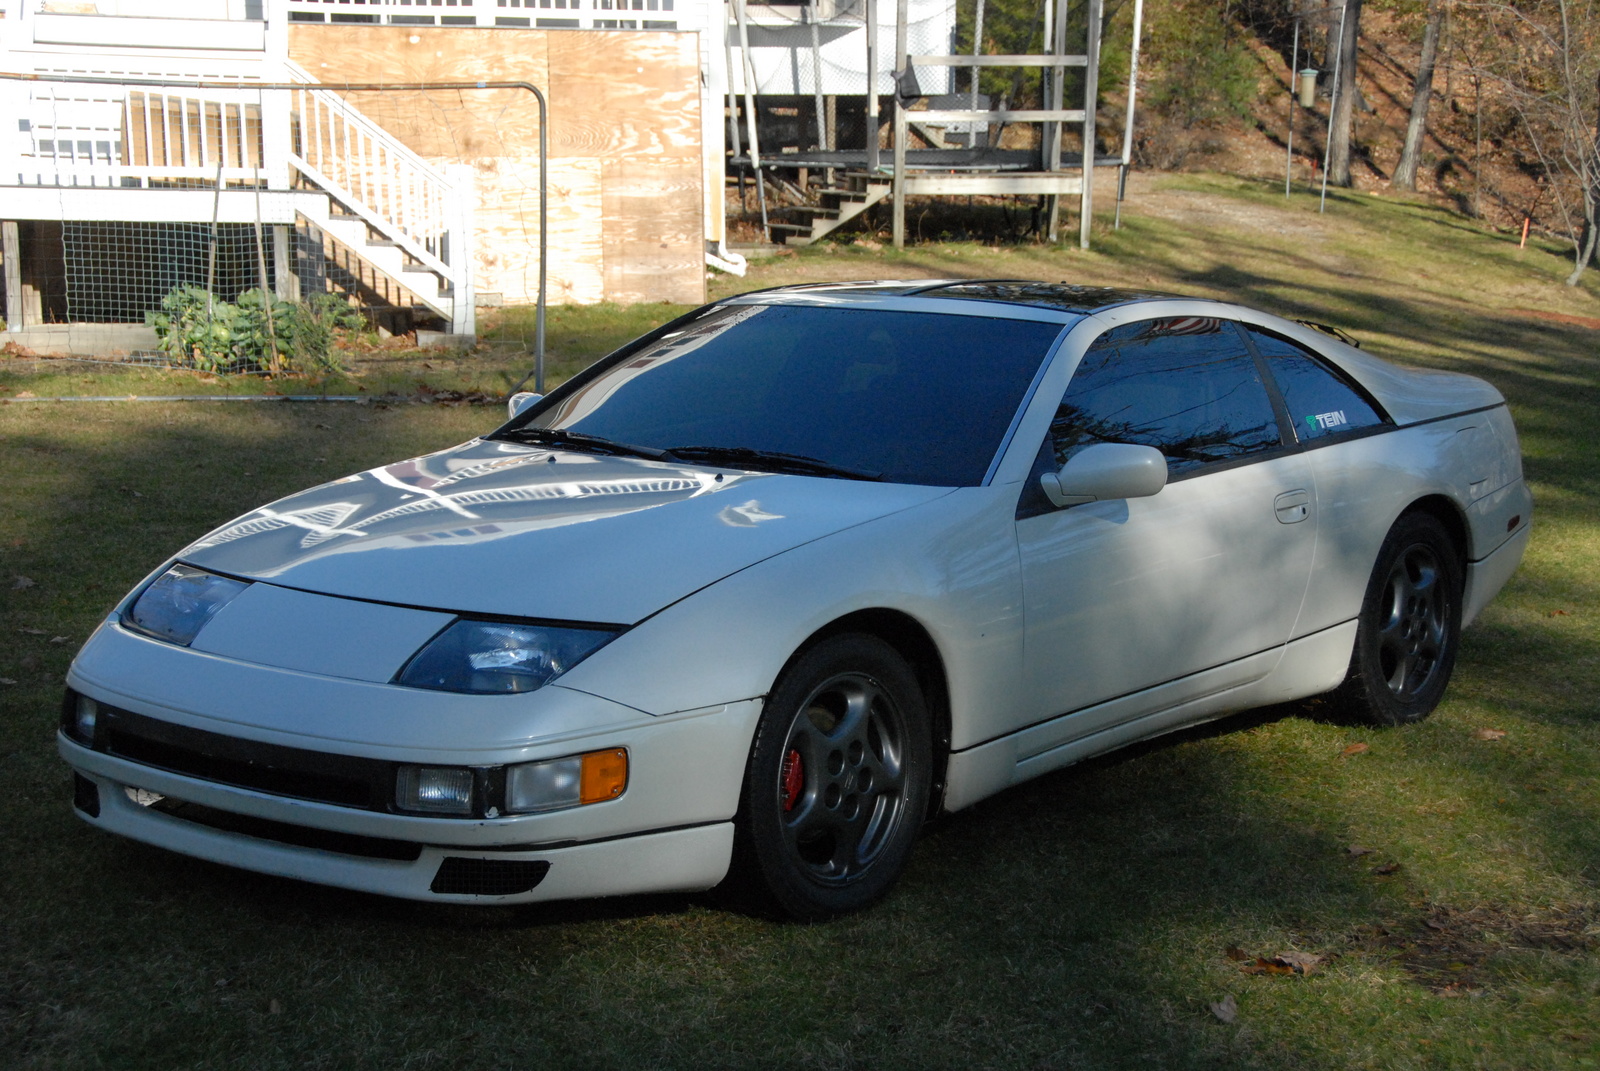 1990 300Zx nissan picture #10